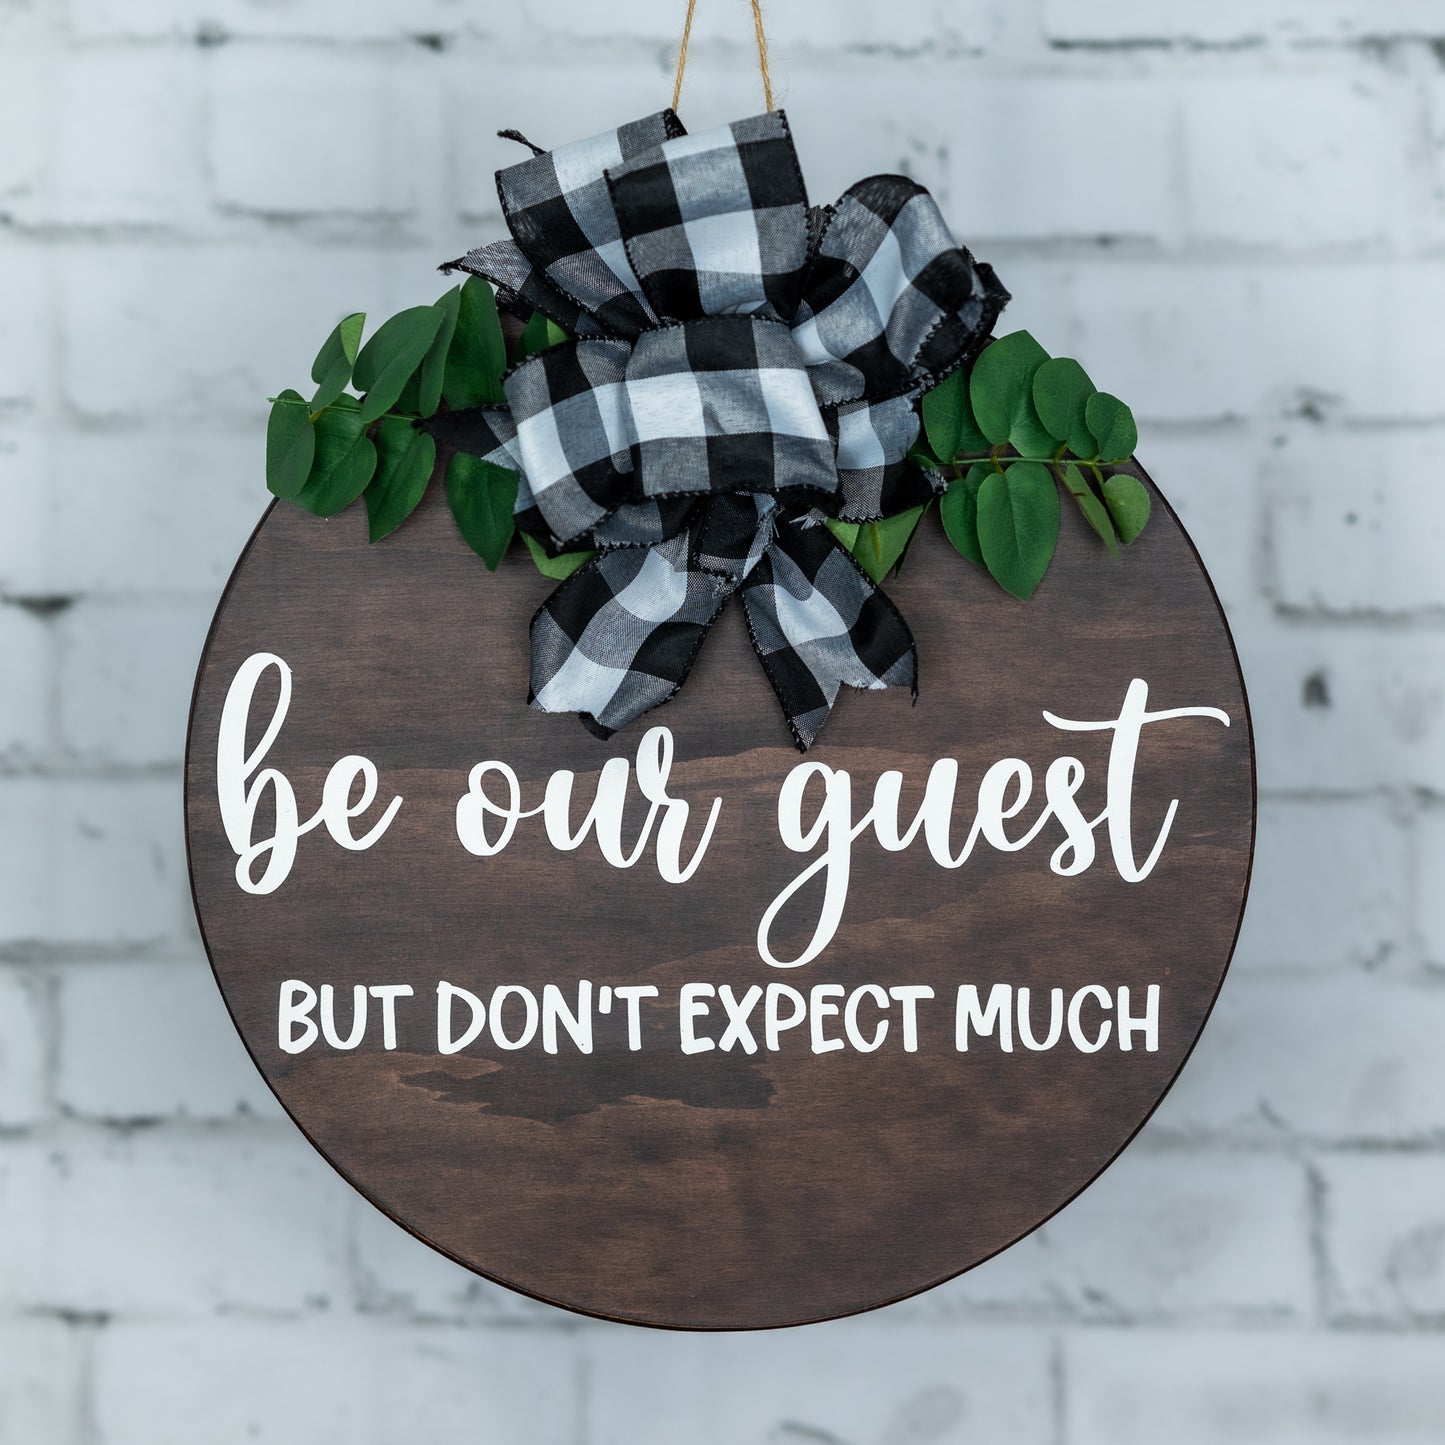 be our guest but don't expect much ~ round door sign